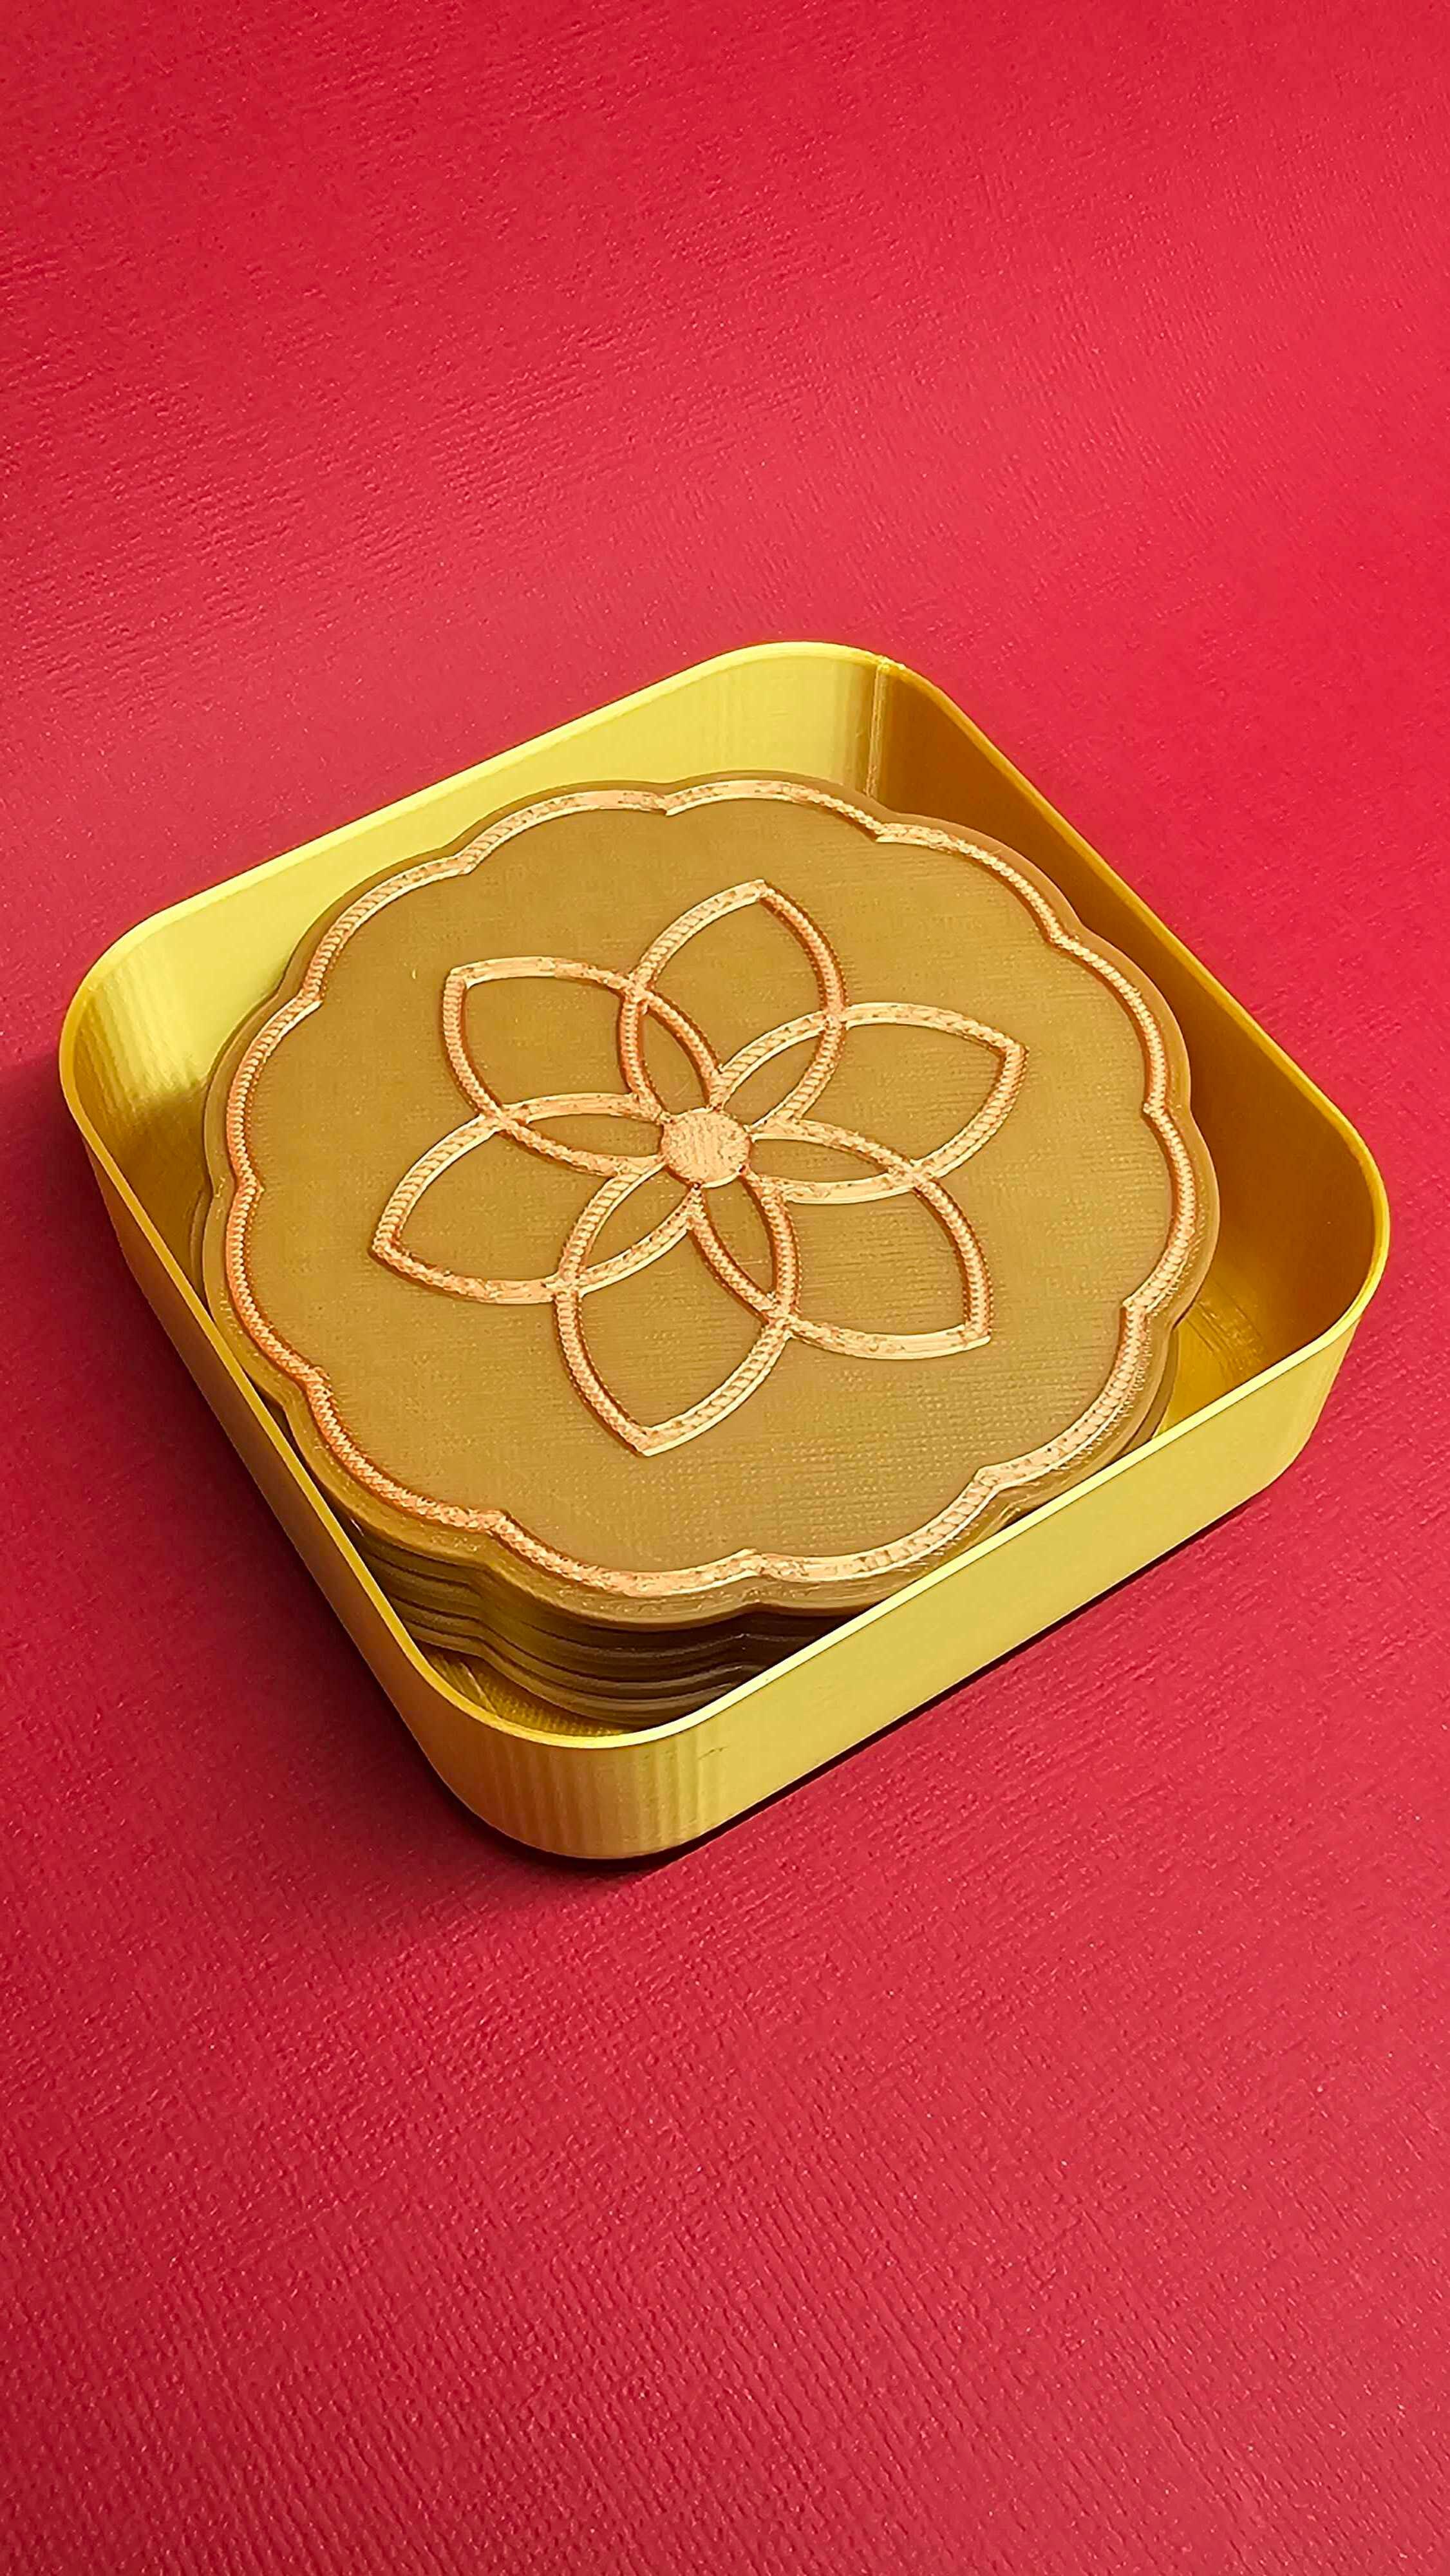 Tray | Coasters holder for 8 mooncake coasters | Designed as a mooncake tray for Mid-Autumn Festival 3d model